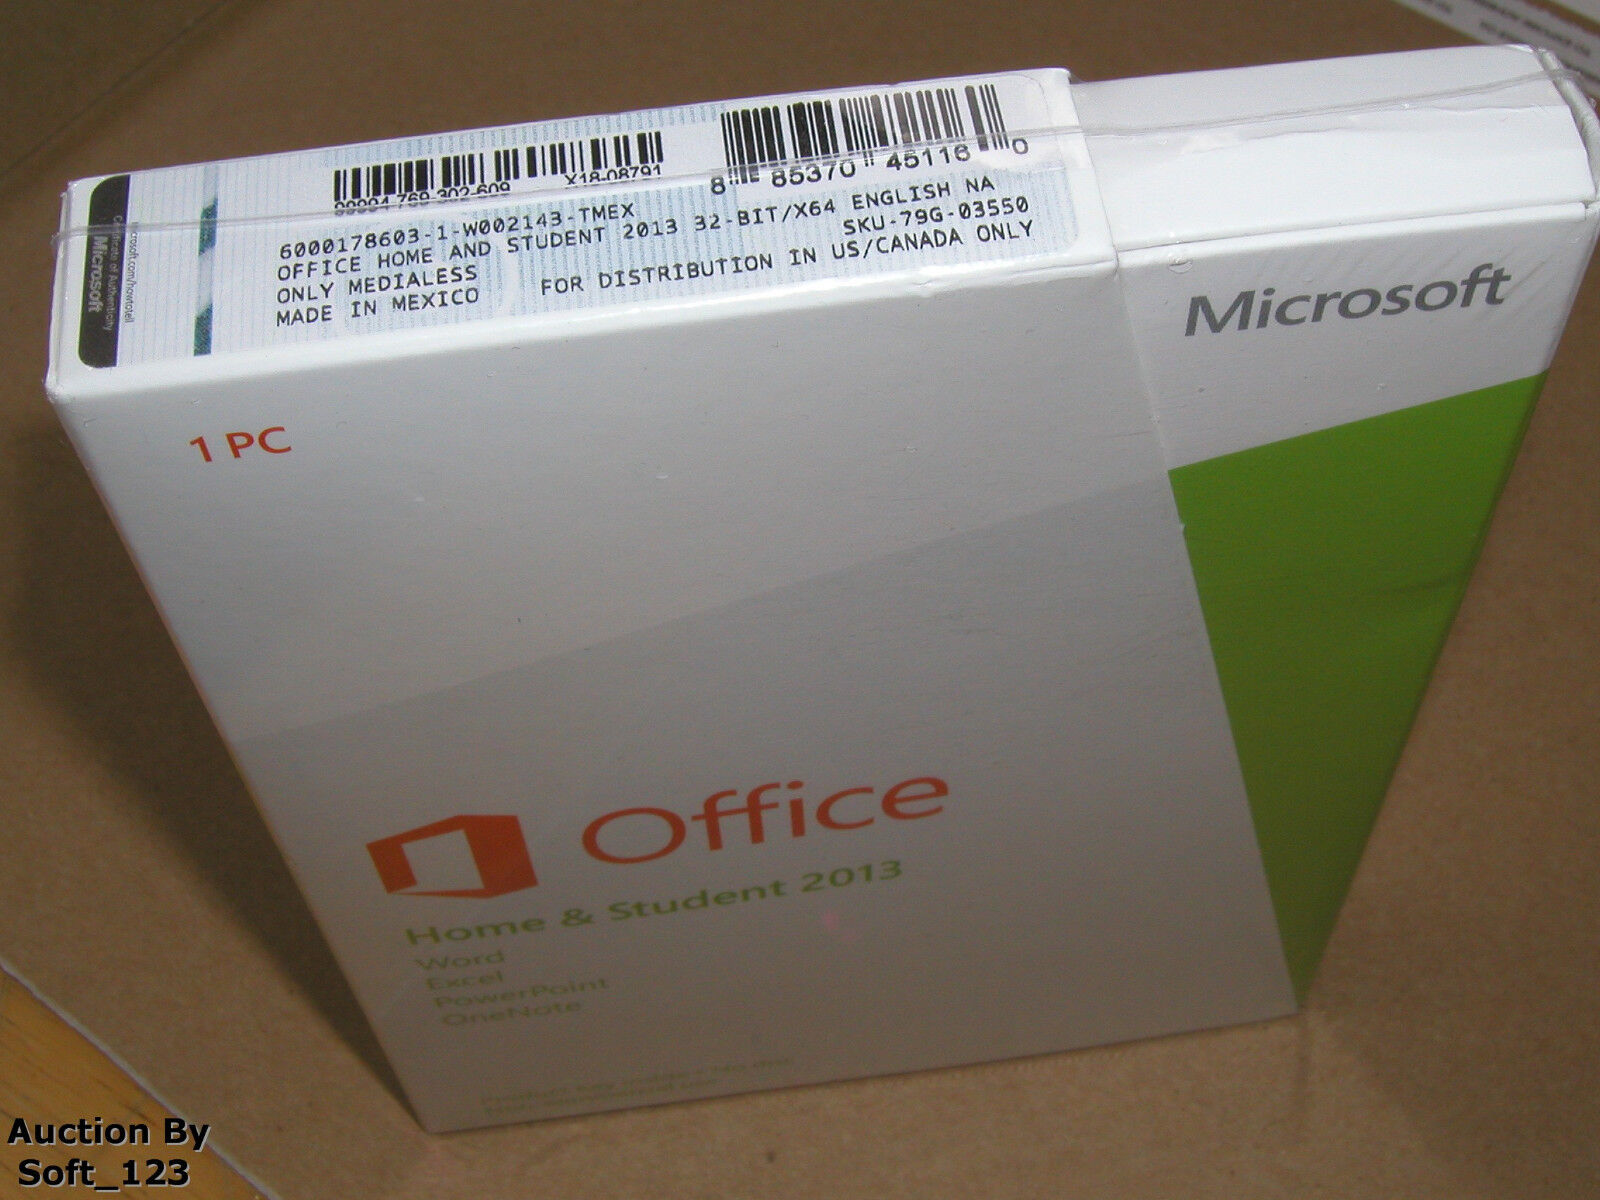 MS Microsoft Office 2013 Home and Student Full English Retail Boxed Version PKC